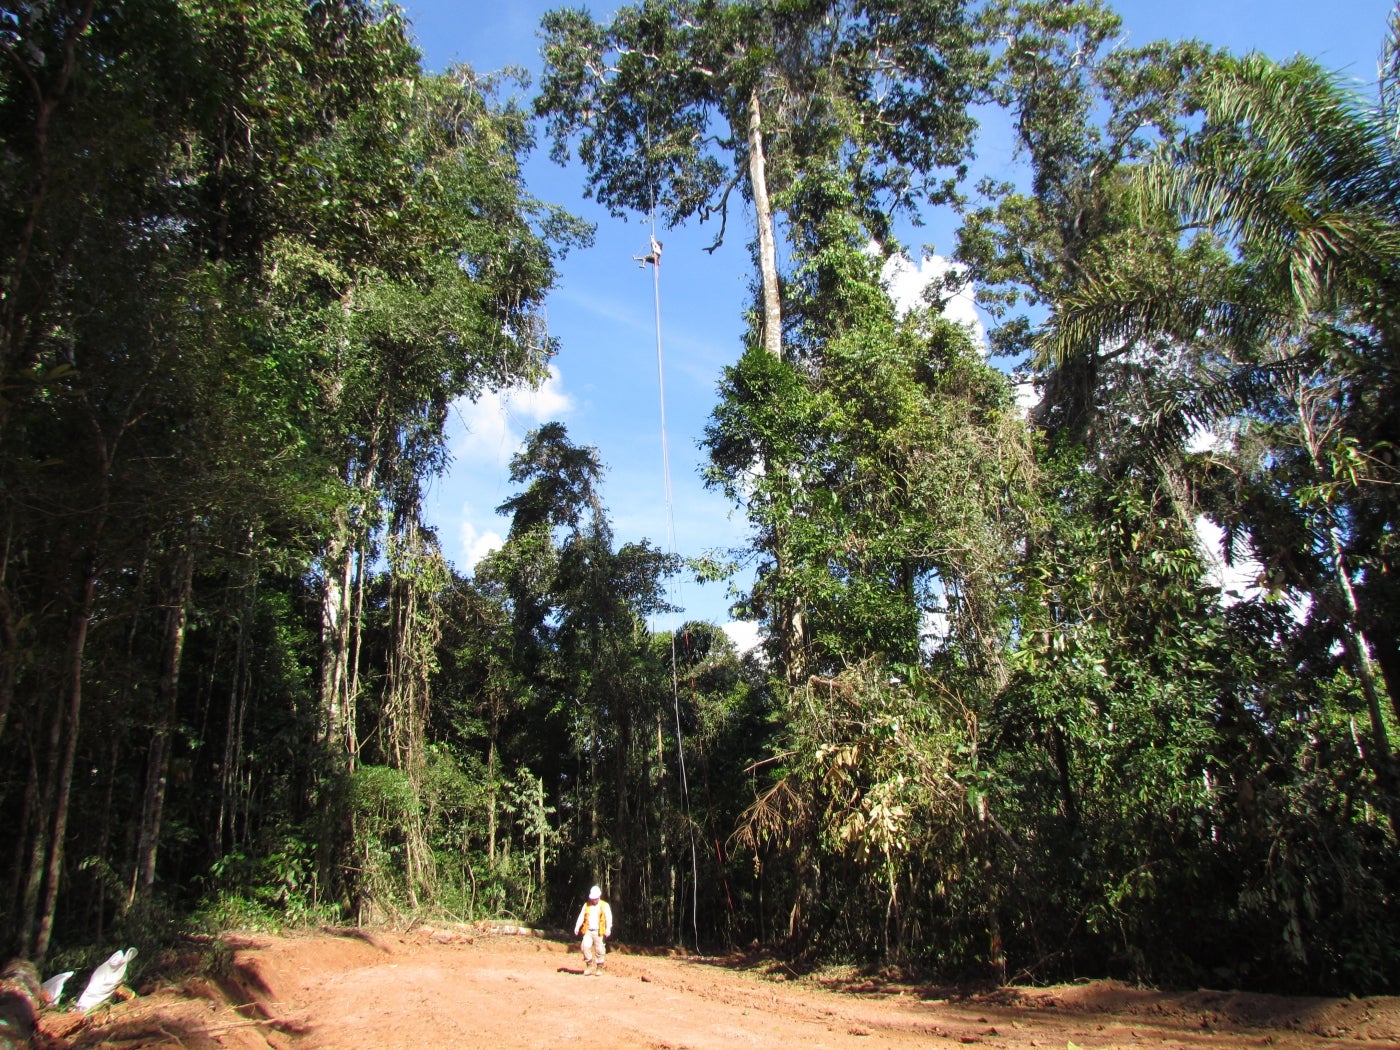 In a clearing for a pipeline in Peru's tropical forest, a researcher can be seen climbing high up into the tree canopy. A person wearing a work vest and hard hat crosses the clearing on the ground.